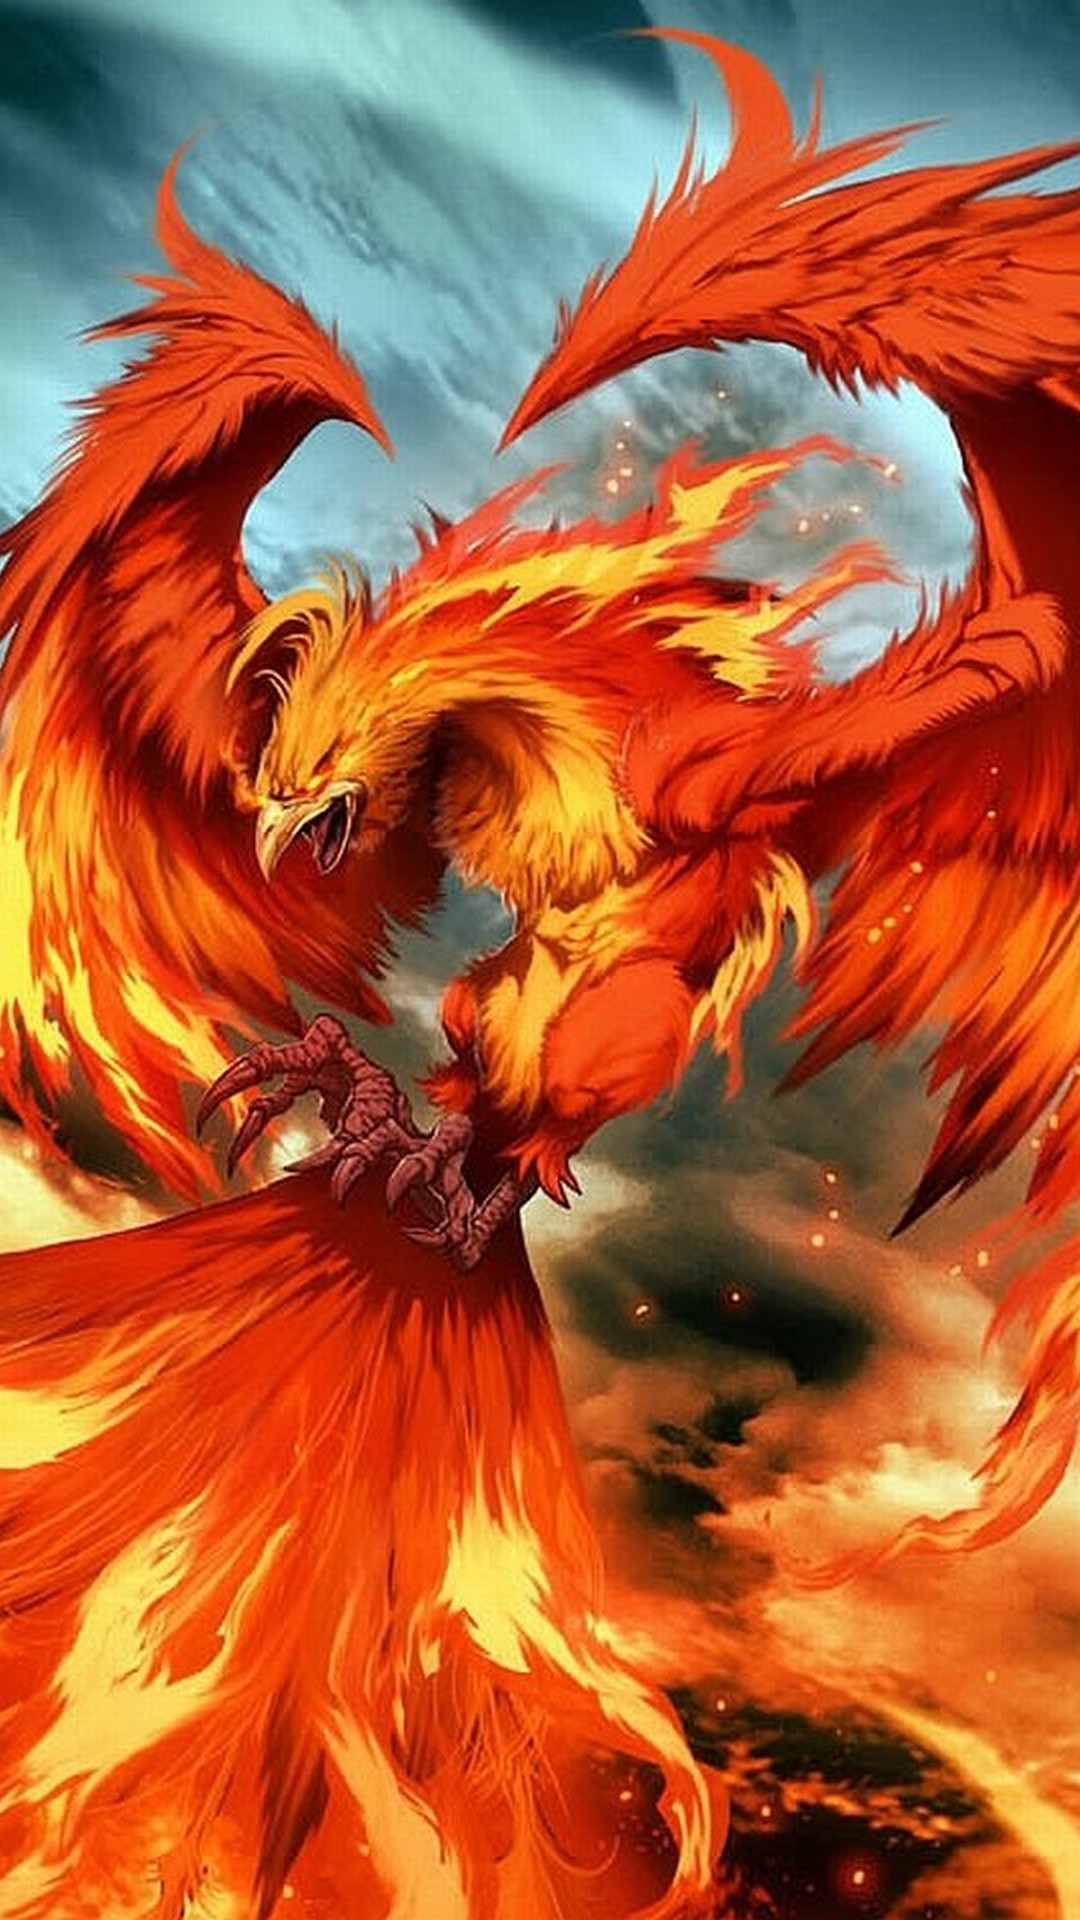 Phoenix Images Wallpaper For Android with resolution 1080X1920 pixel. You can make this wallpaper for your Android backgrounds, Tablet, Smartphones Screensavers and Mobile Phone Lock Screen